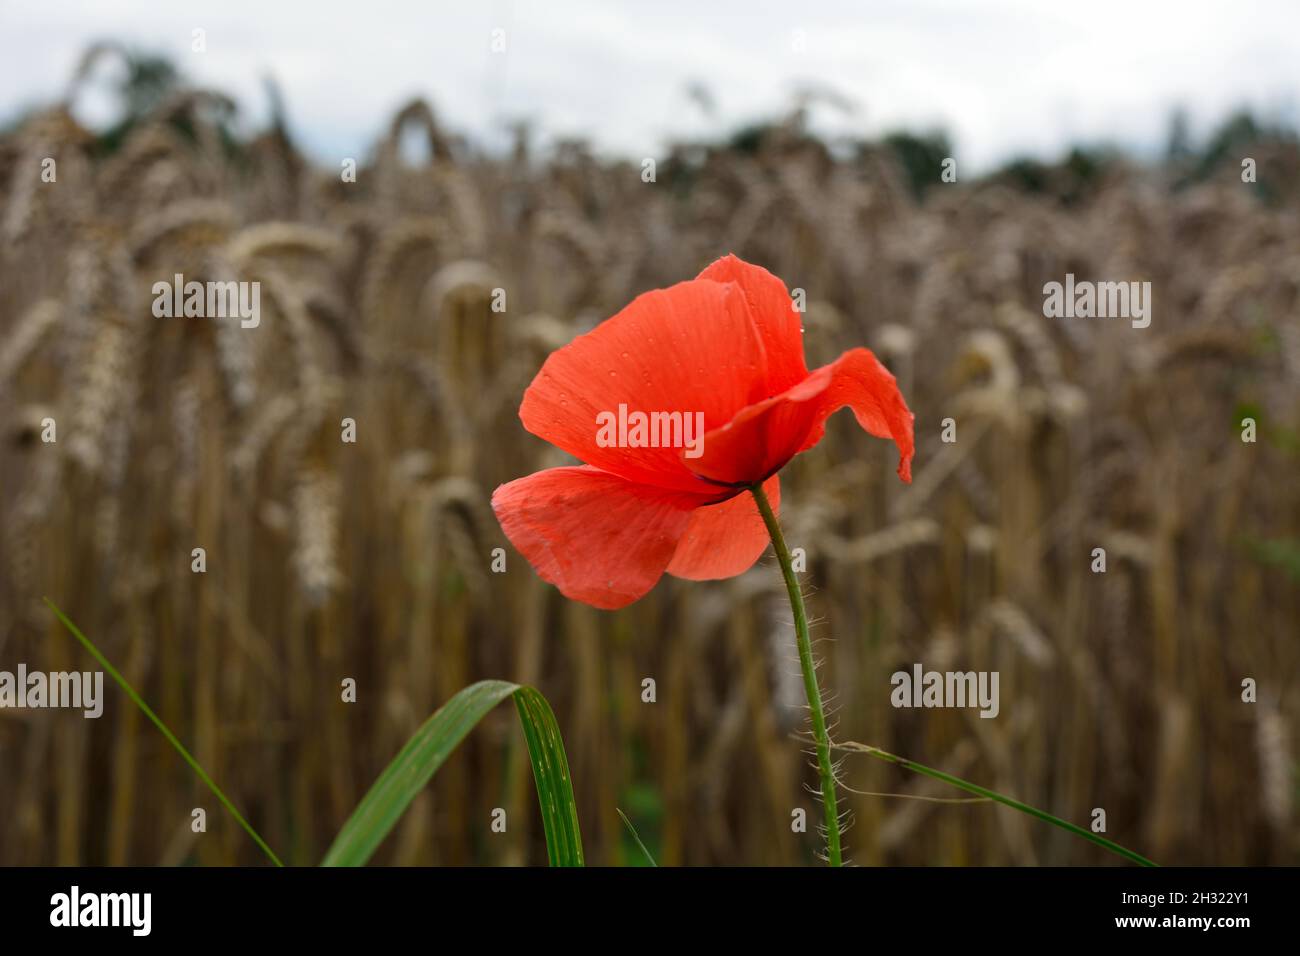 Portrait Of A Poppy (Plant) Infront Of A Wheat Field. Stock Photo